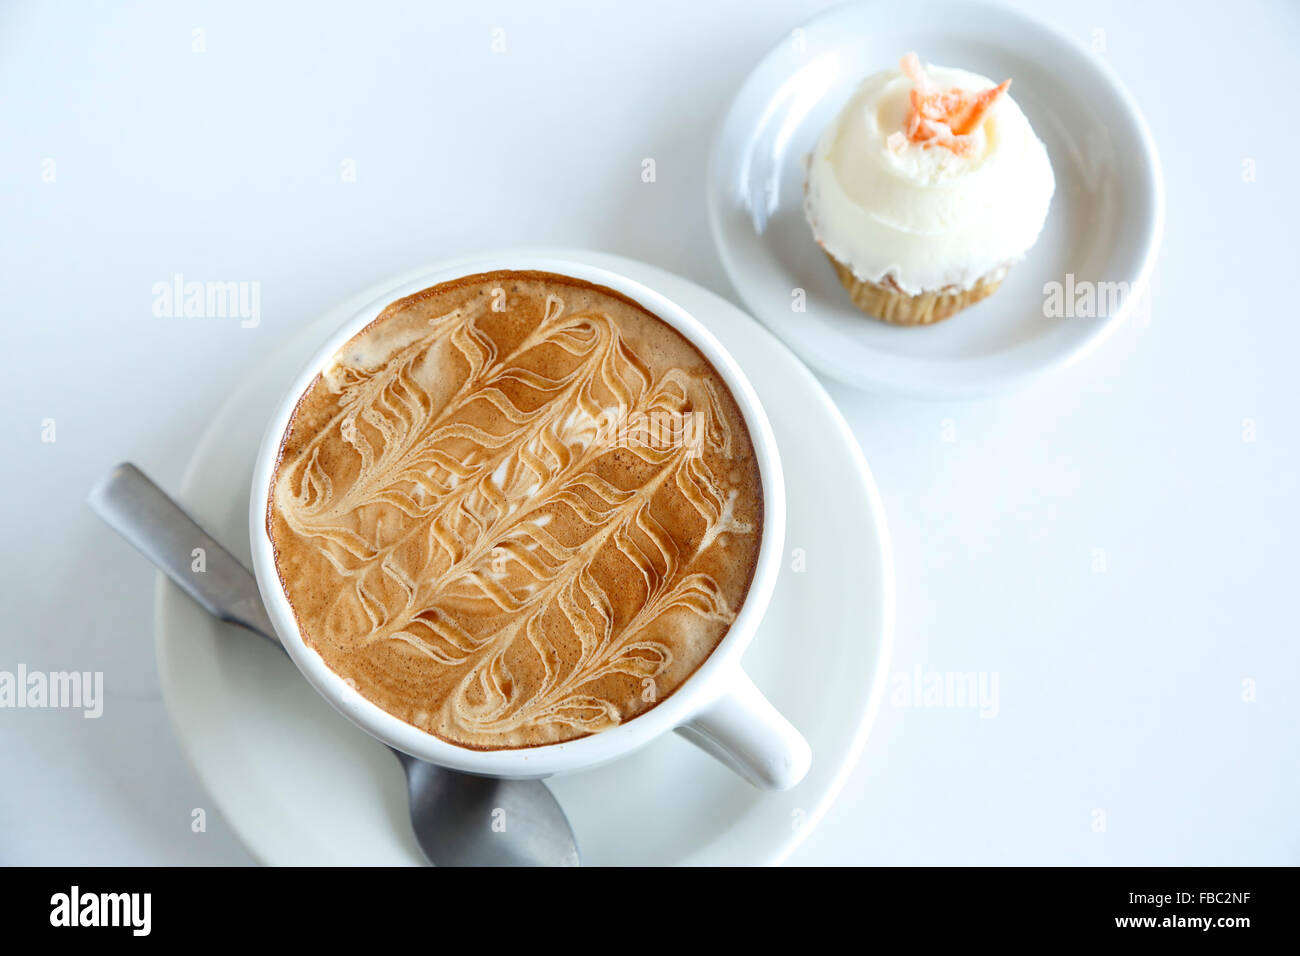 Coffee ('The Birdie') and carrot cupcake, Dulce Bakery & Coffee, Santa Fe, New Mexico USA Stock Photo